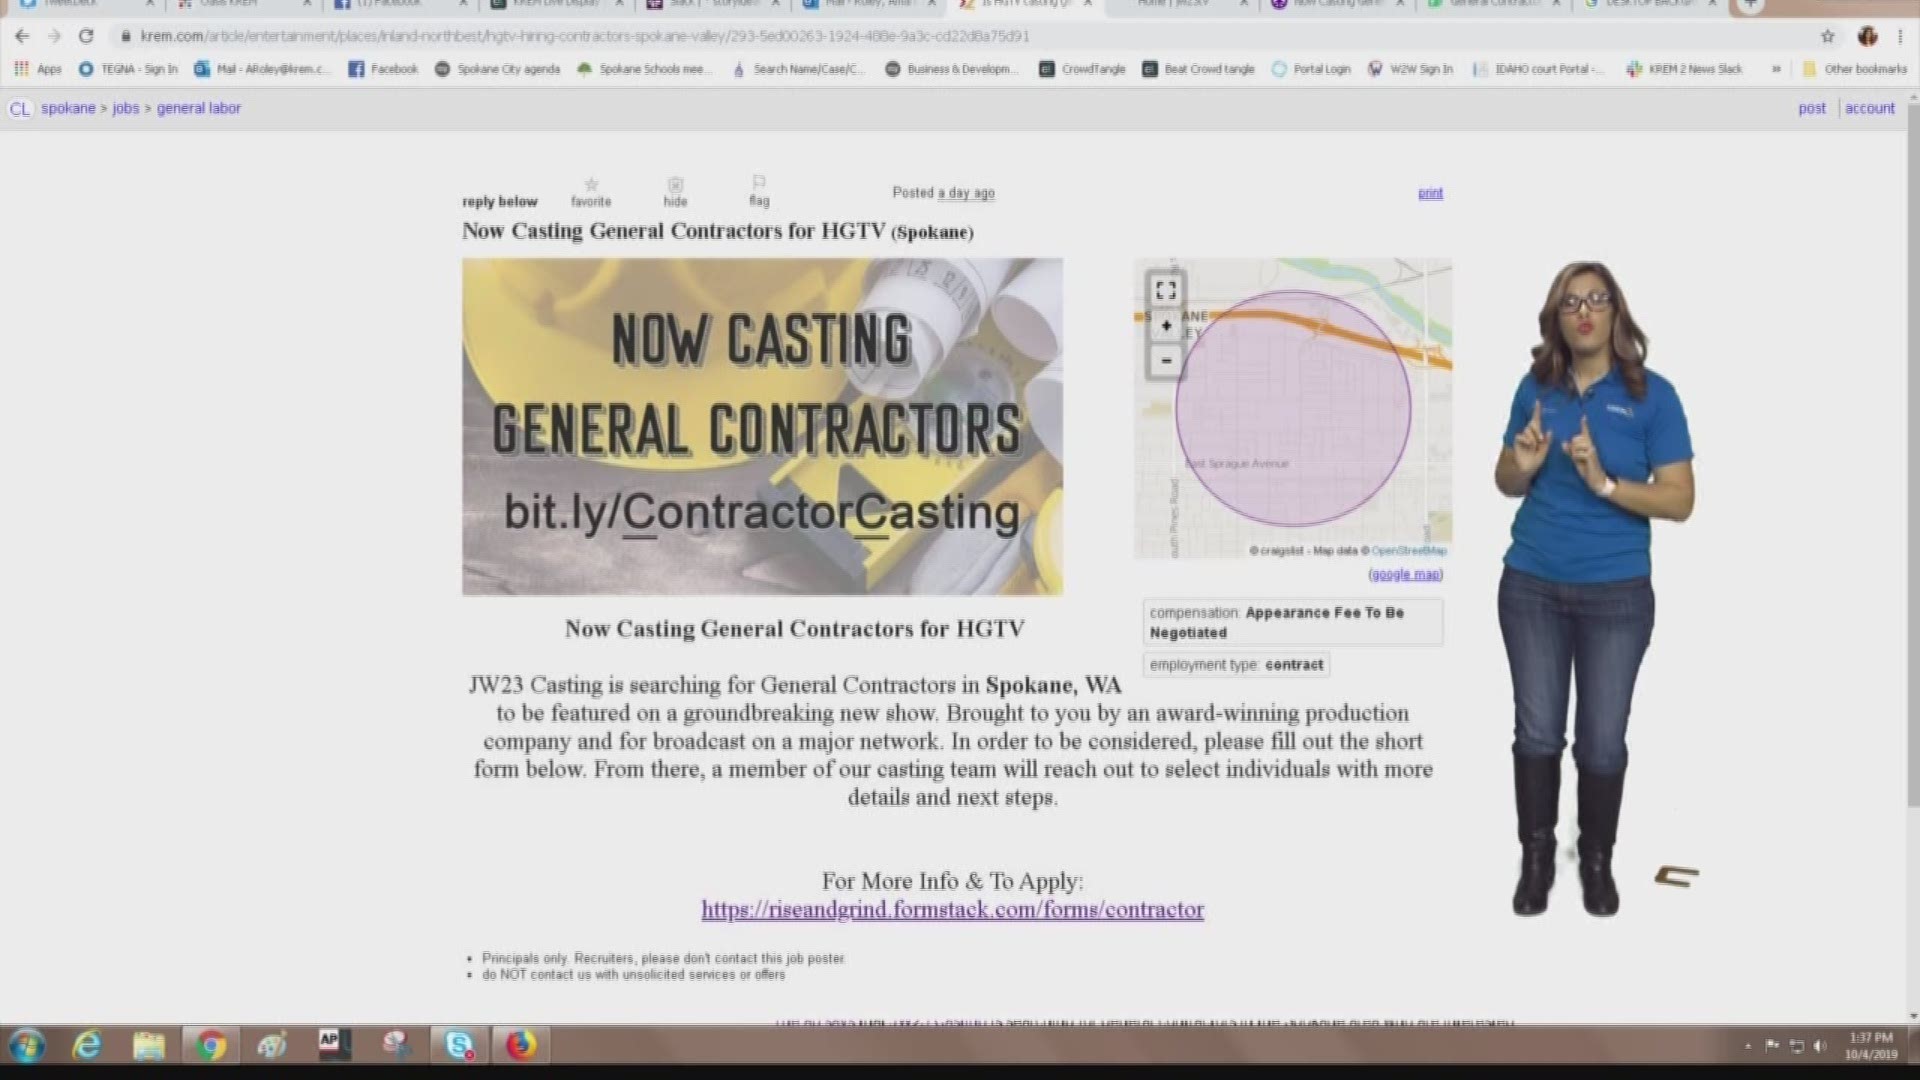 A mysterious Craiglist ad is throwing hints that HGTV could be looking into hiring general contractors from our area for a new show.